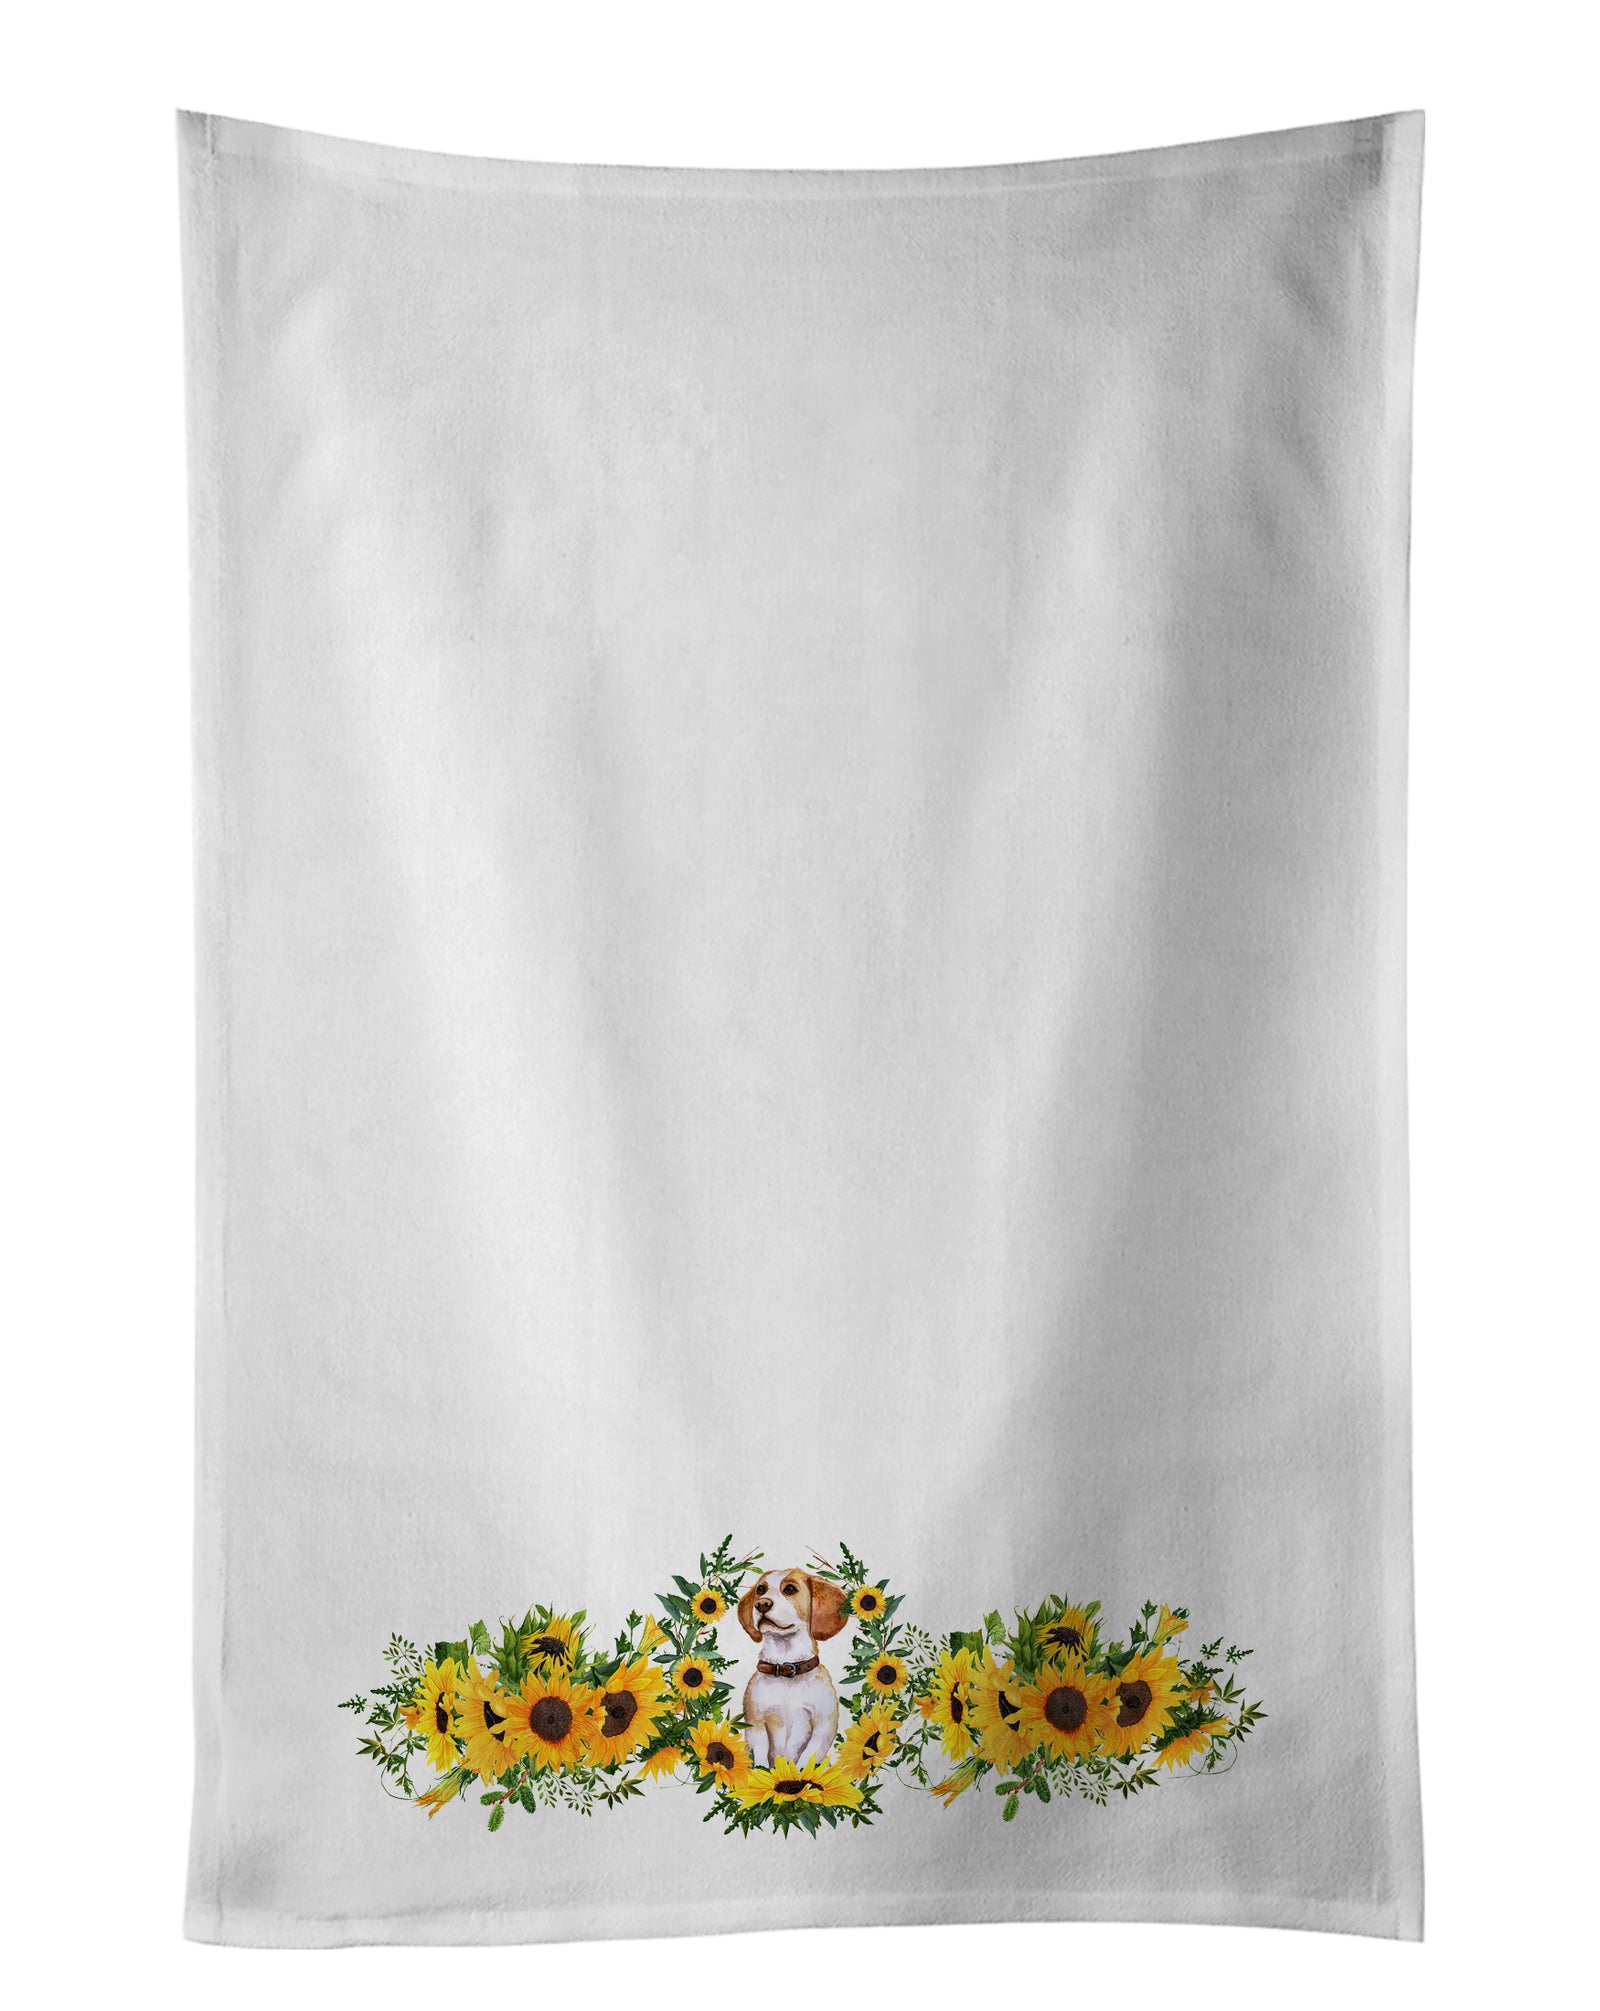 Buy this Beagle in Sunflowers White Kitchen Towel Set of 2